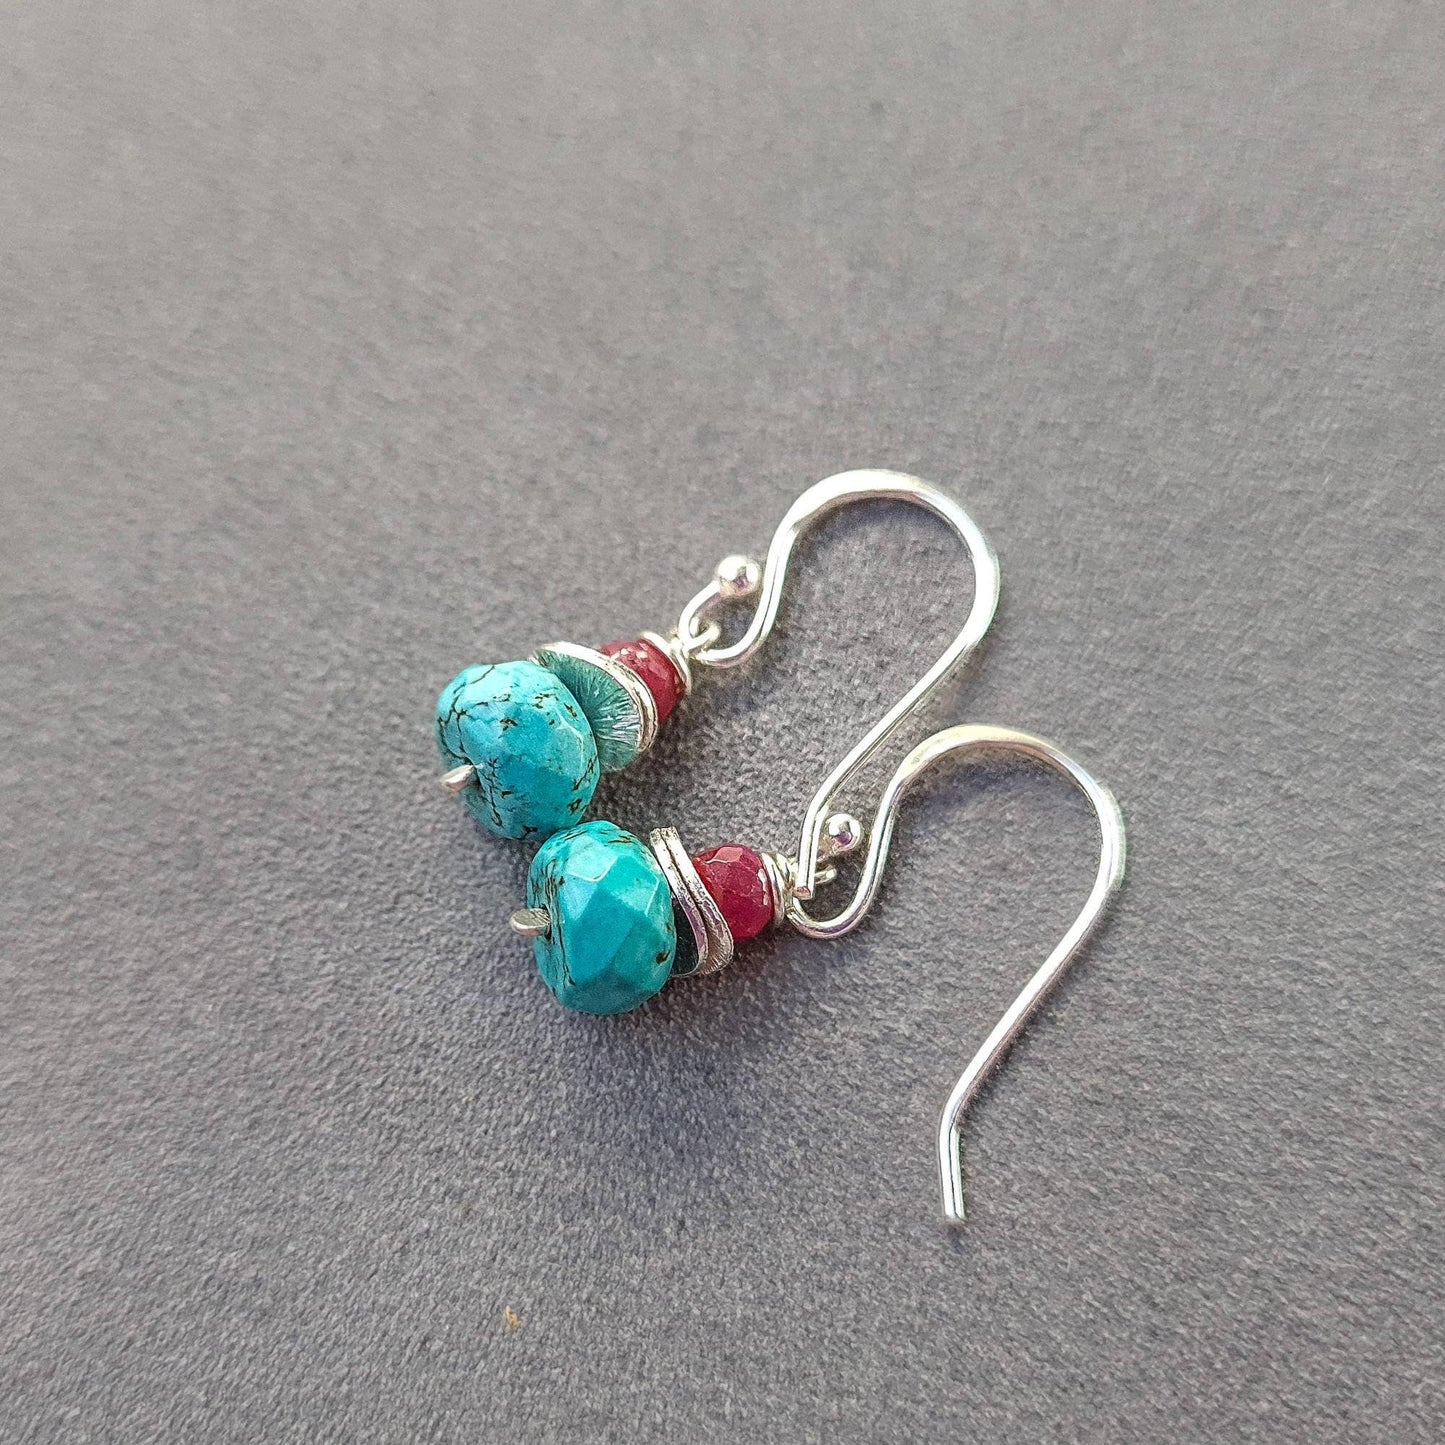 Turquoise and ruby drop earrings in sterling silver